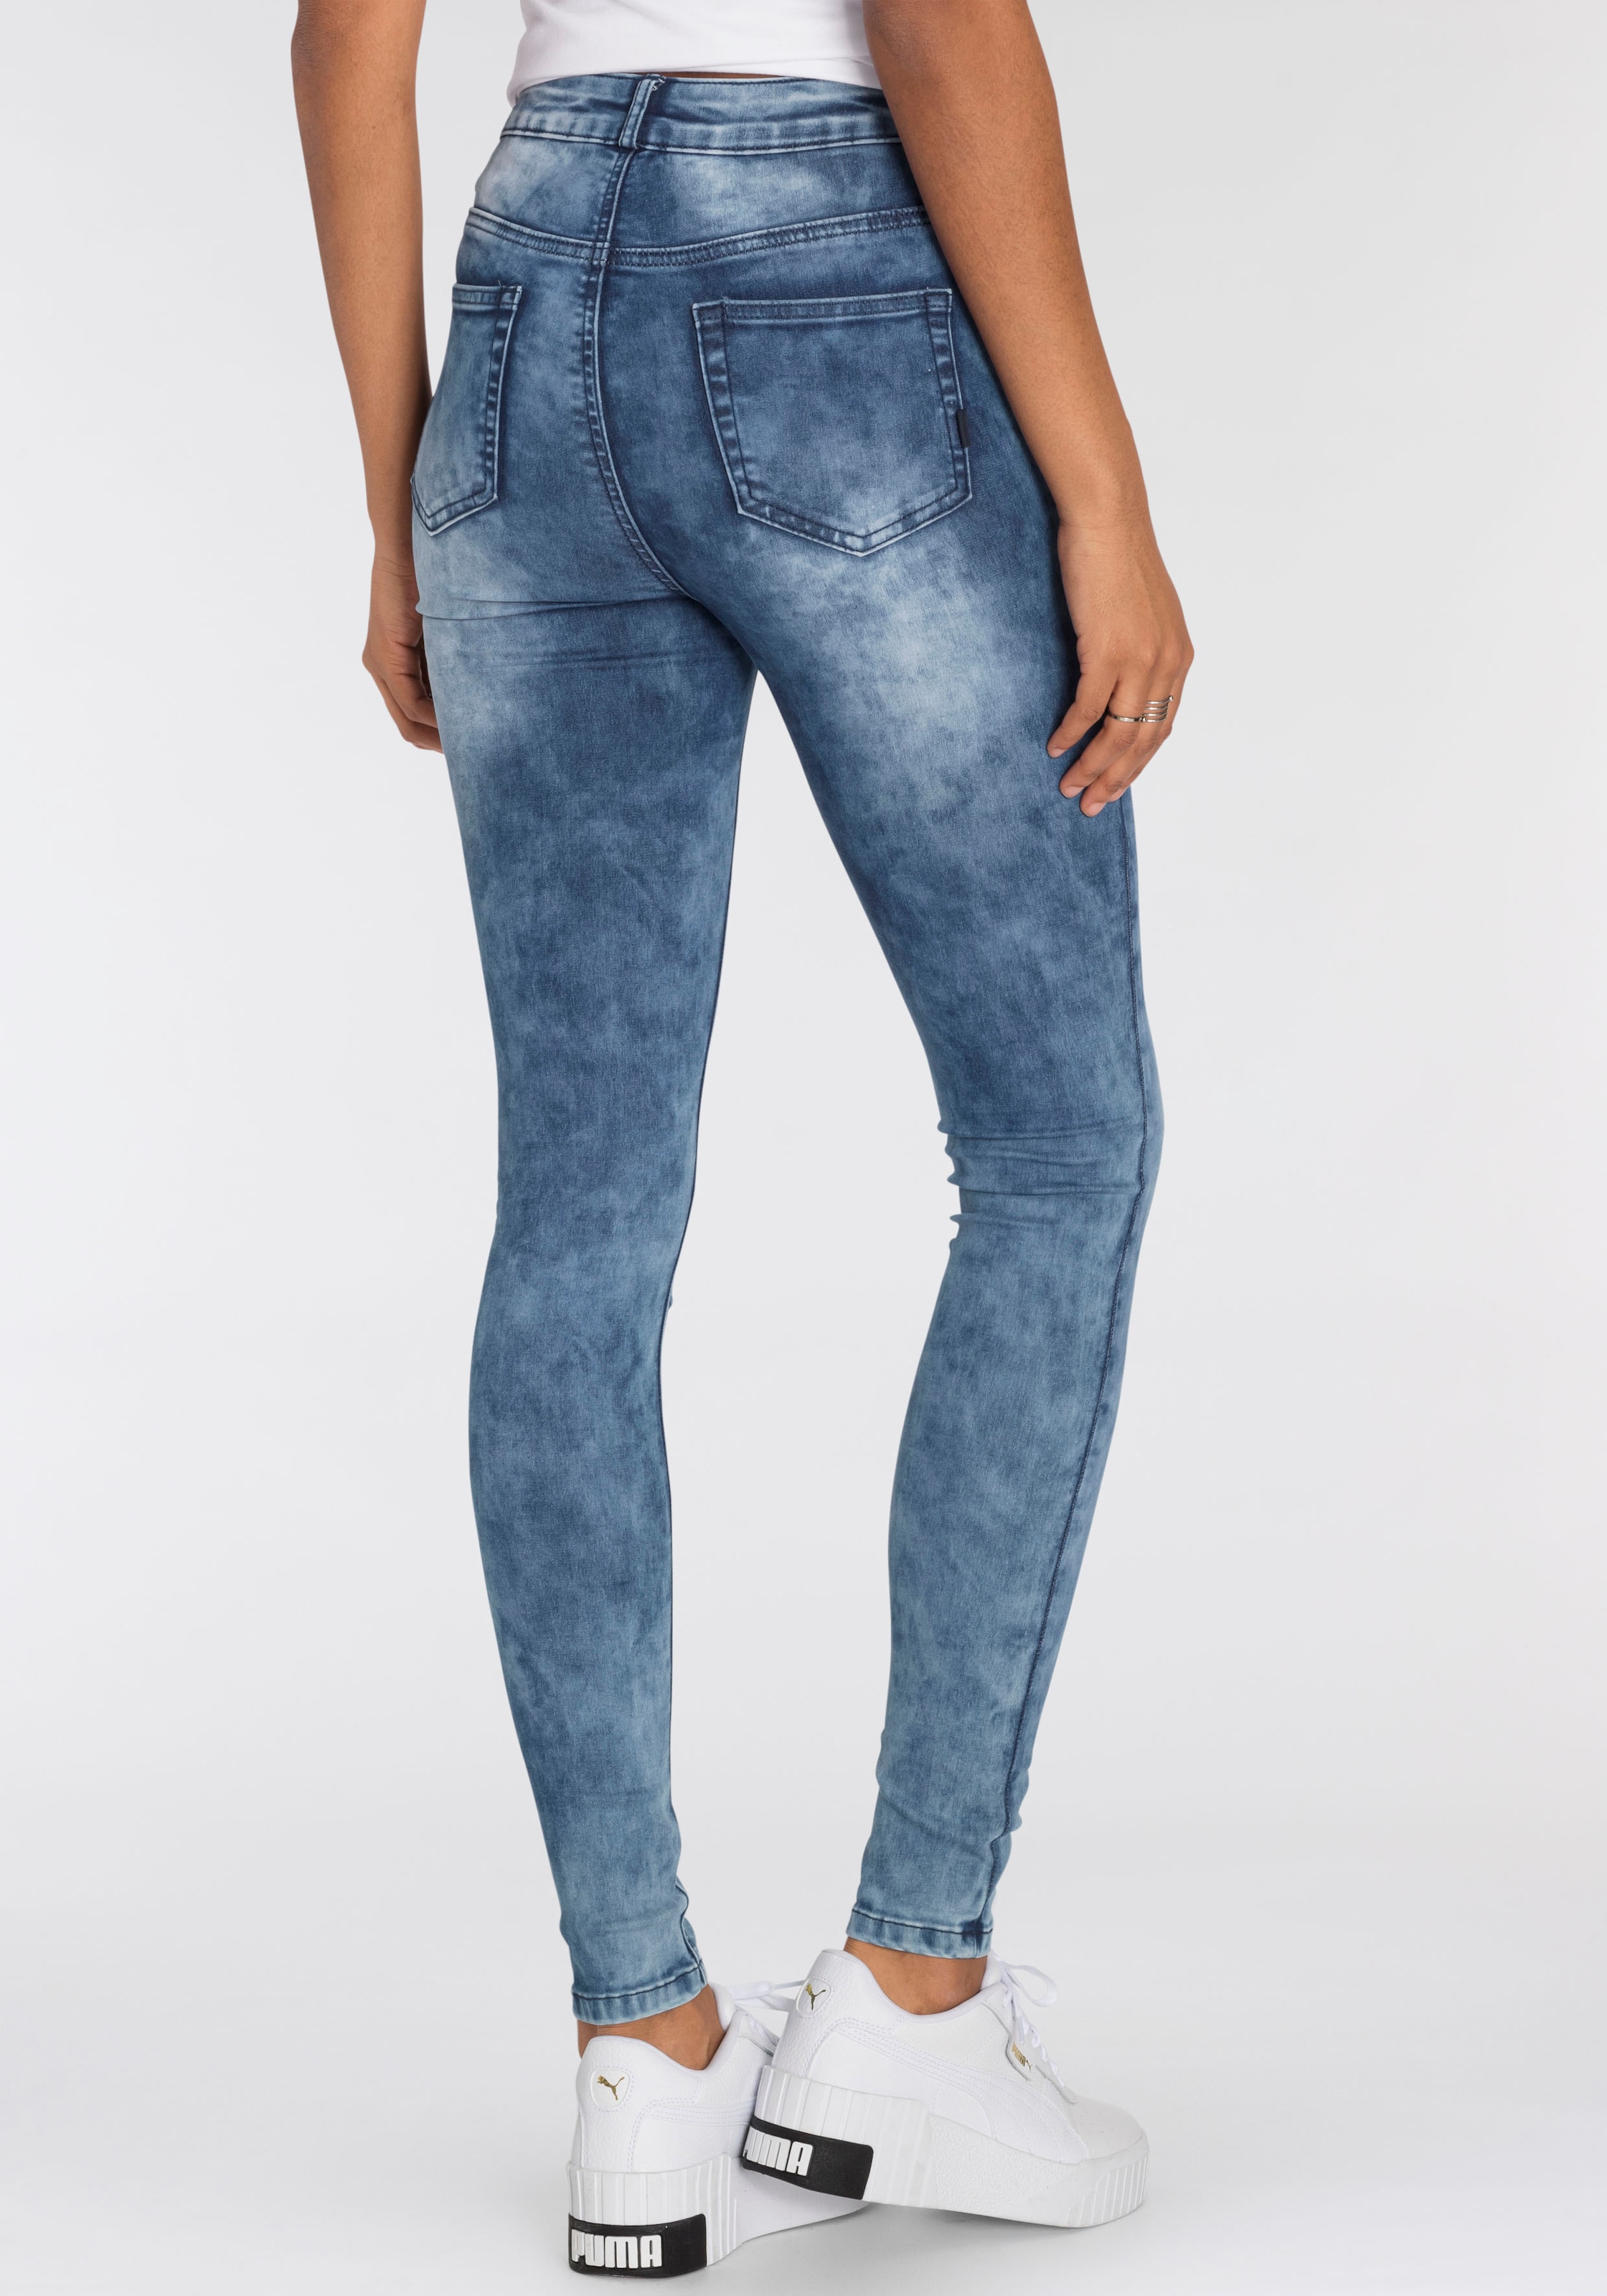 Arizona Skinny-fit-Jeans »Ultra Stretch moon shoppen Jeans washed«, walking Moonwashed I\'m 